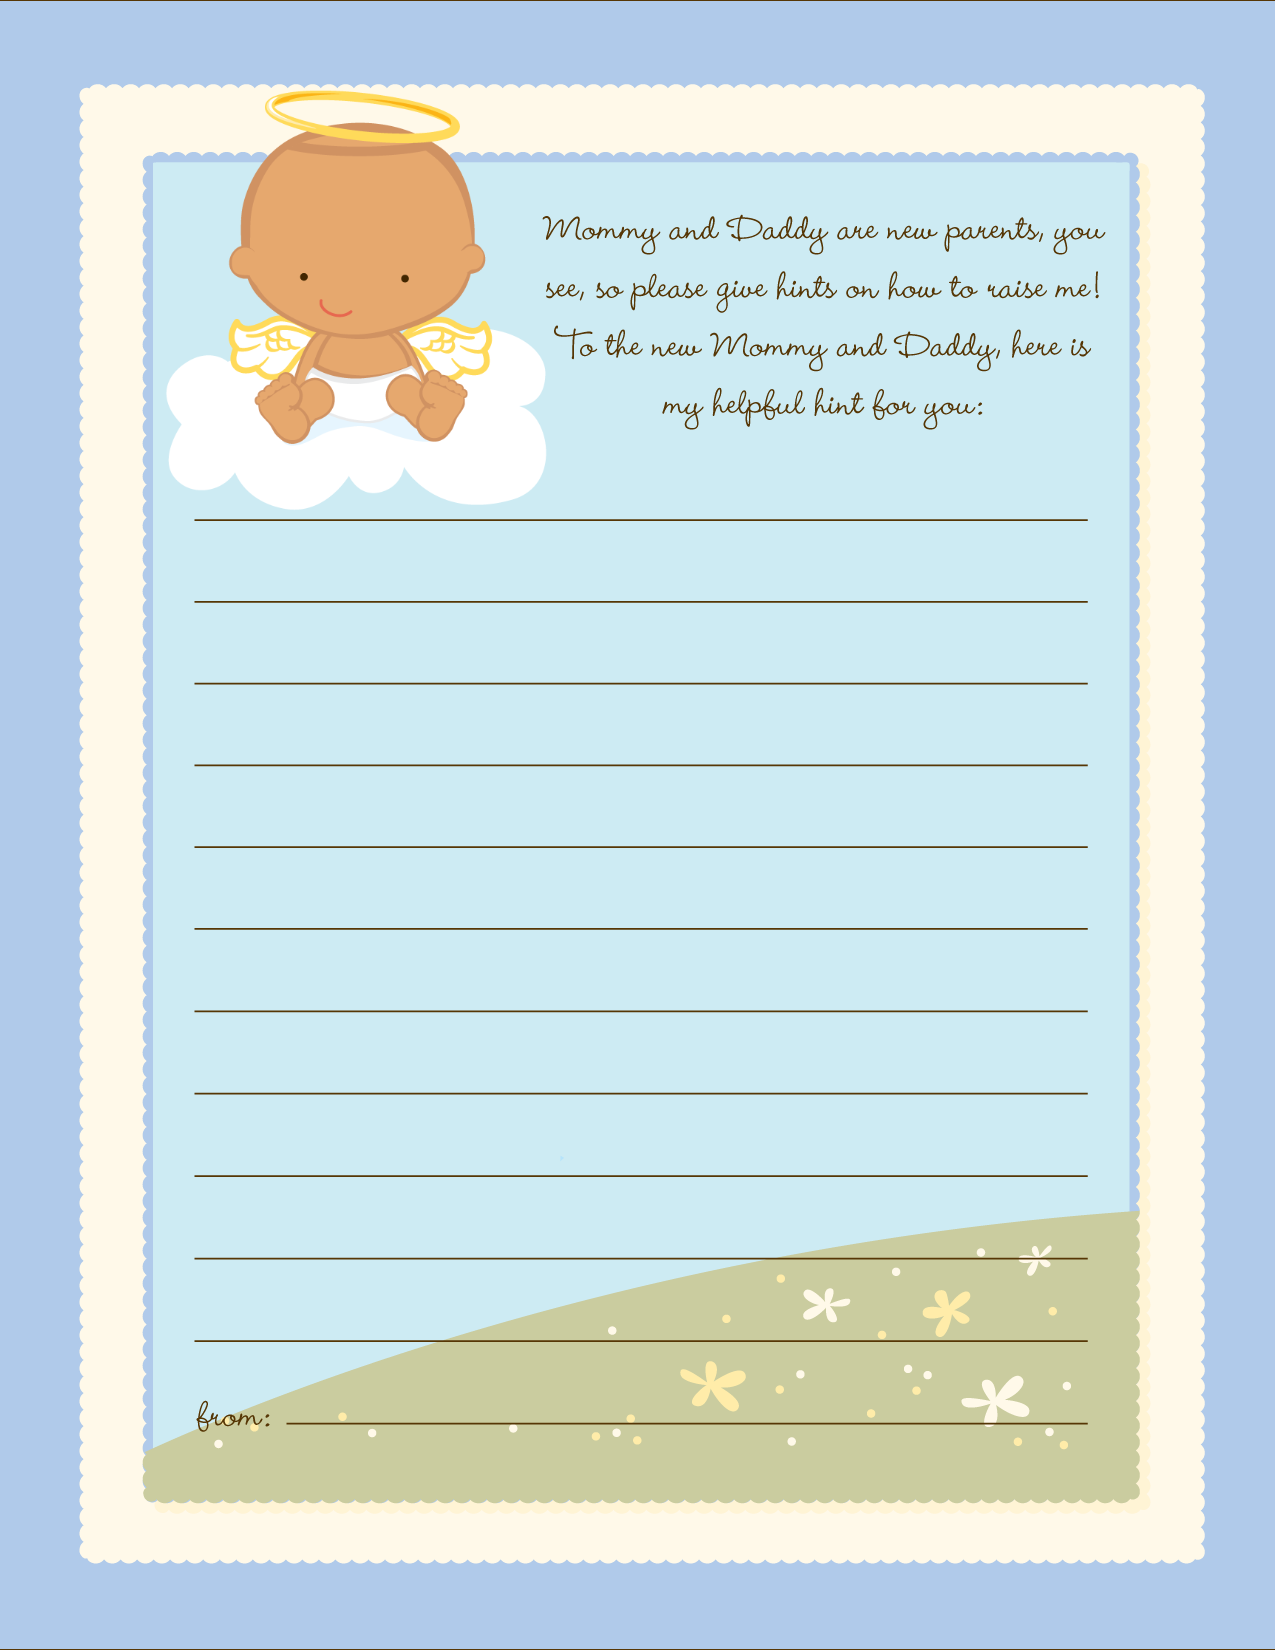  Angel in the Cloud Boy - Baby Shower Notes of Advice Caucasian